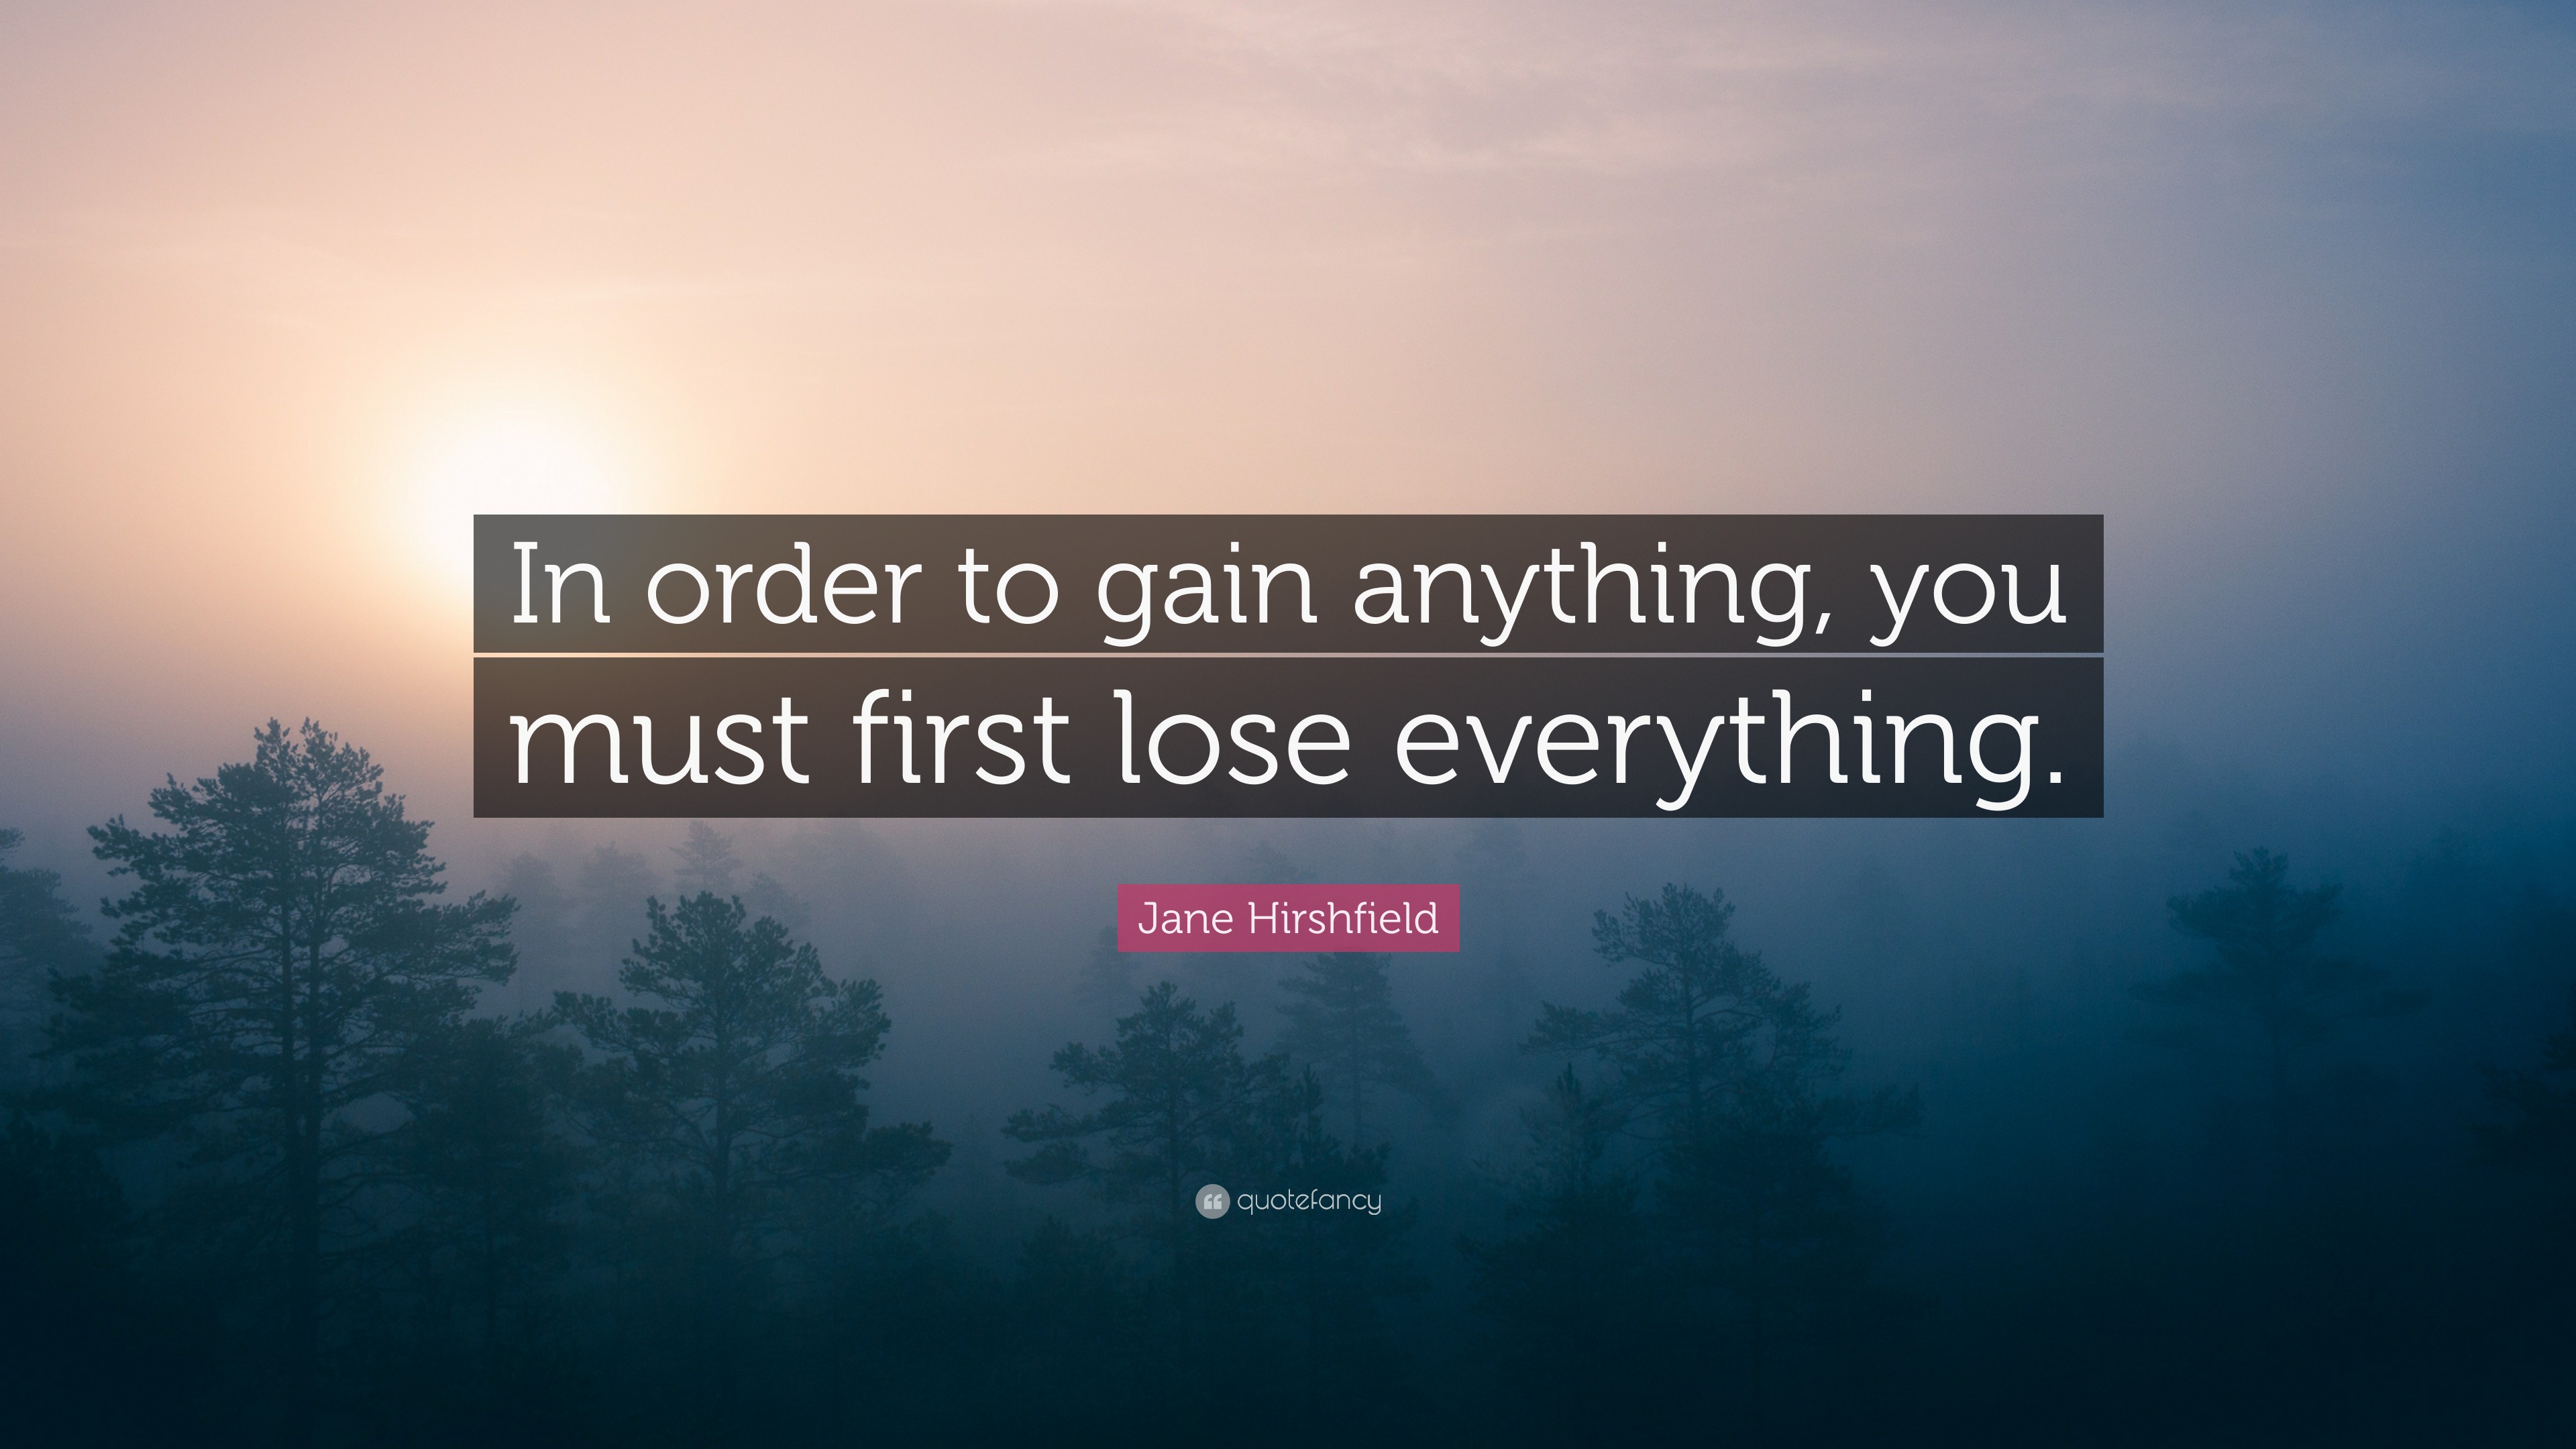 Jane Hirshfield Quote “in Order To Gain Anything You Must First Lose Everything” 